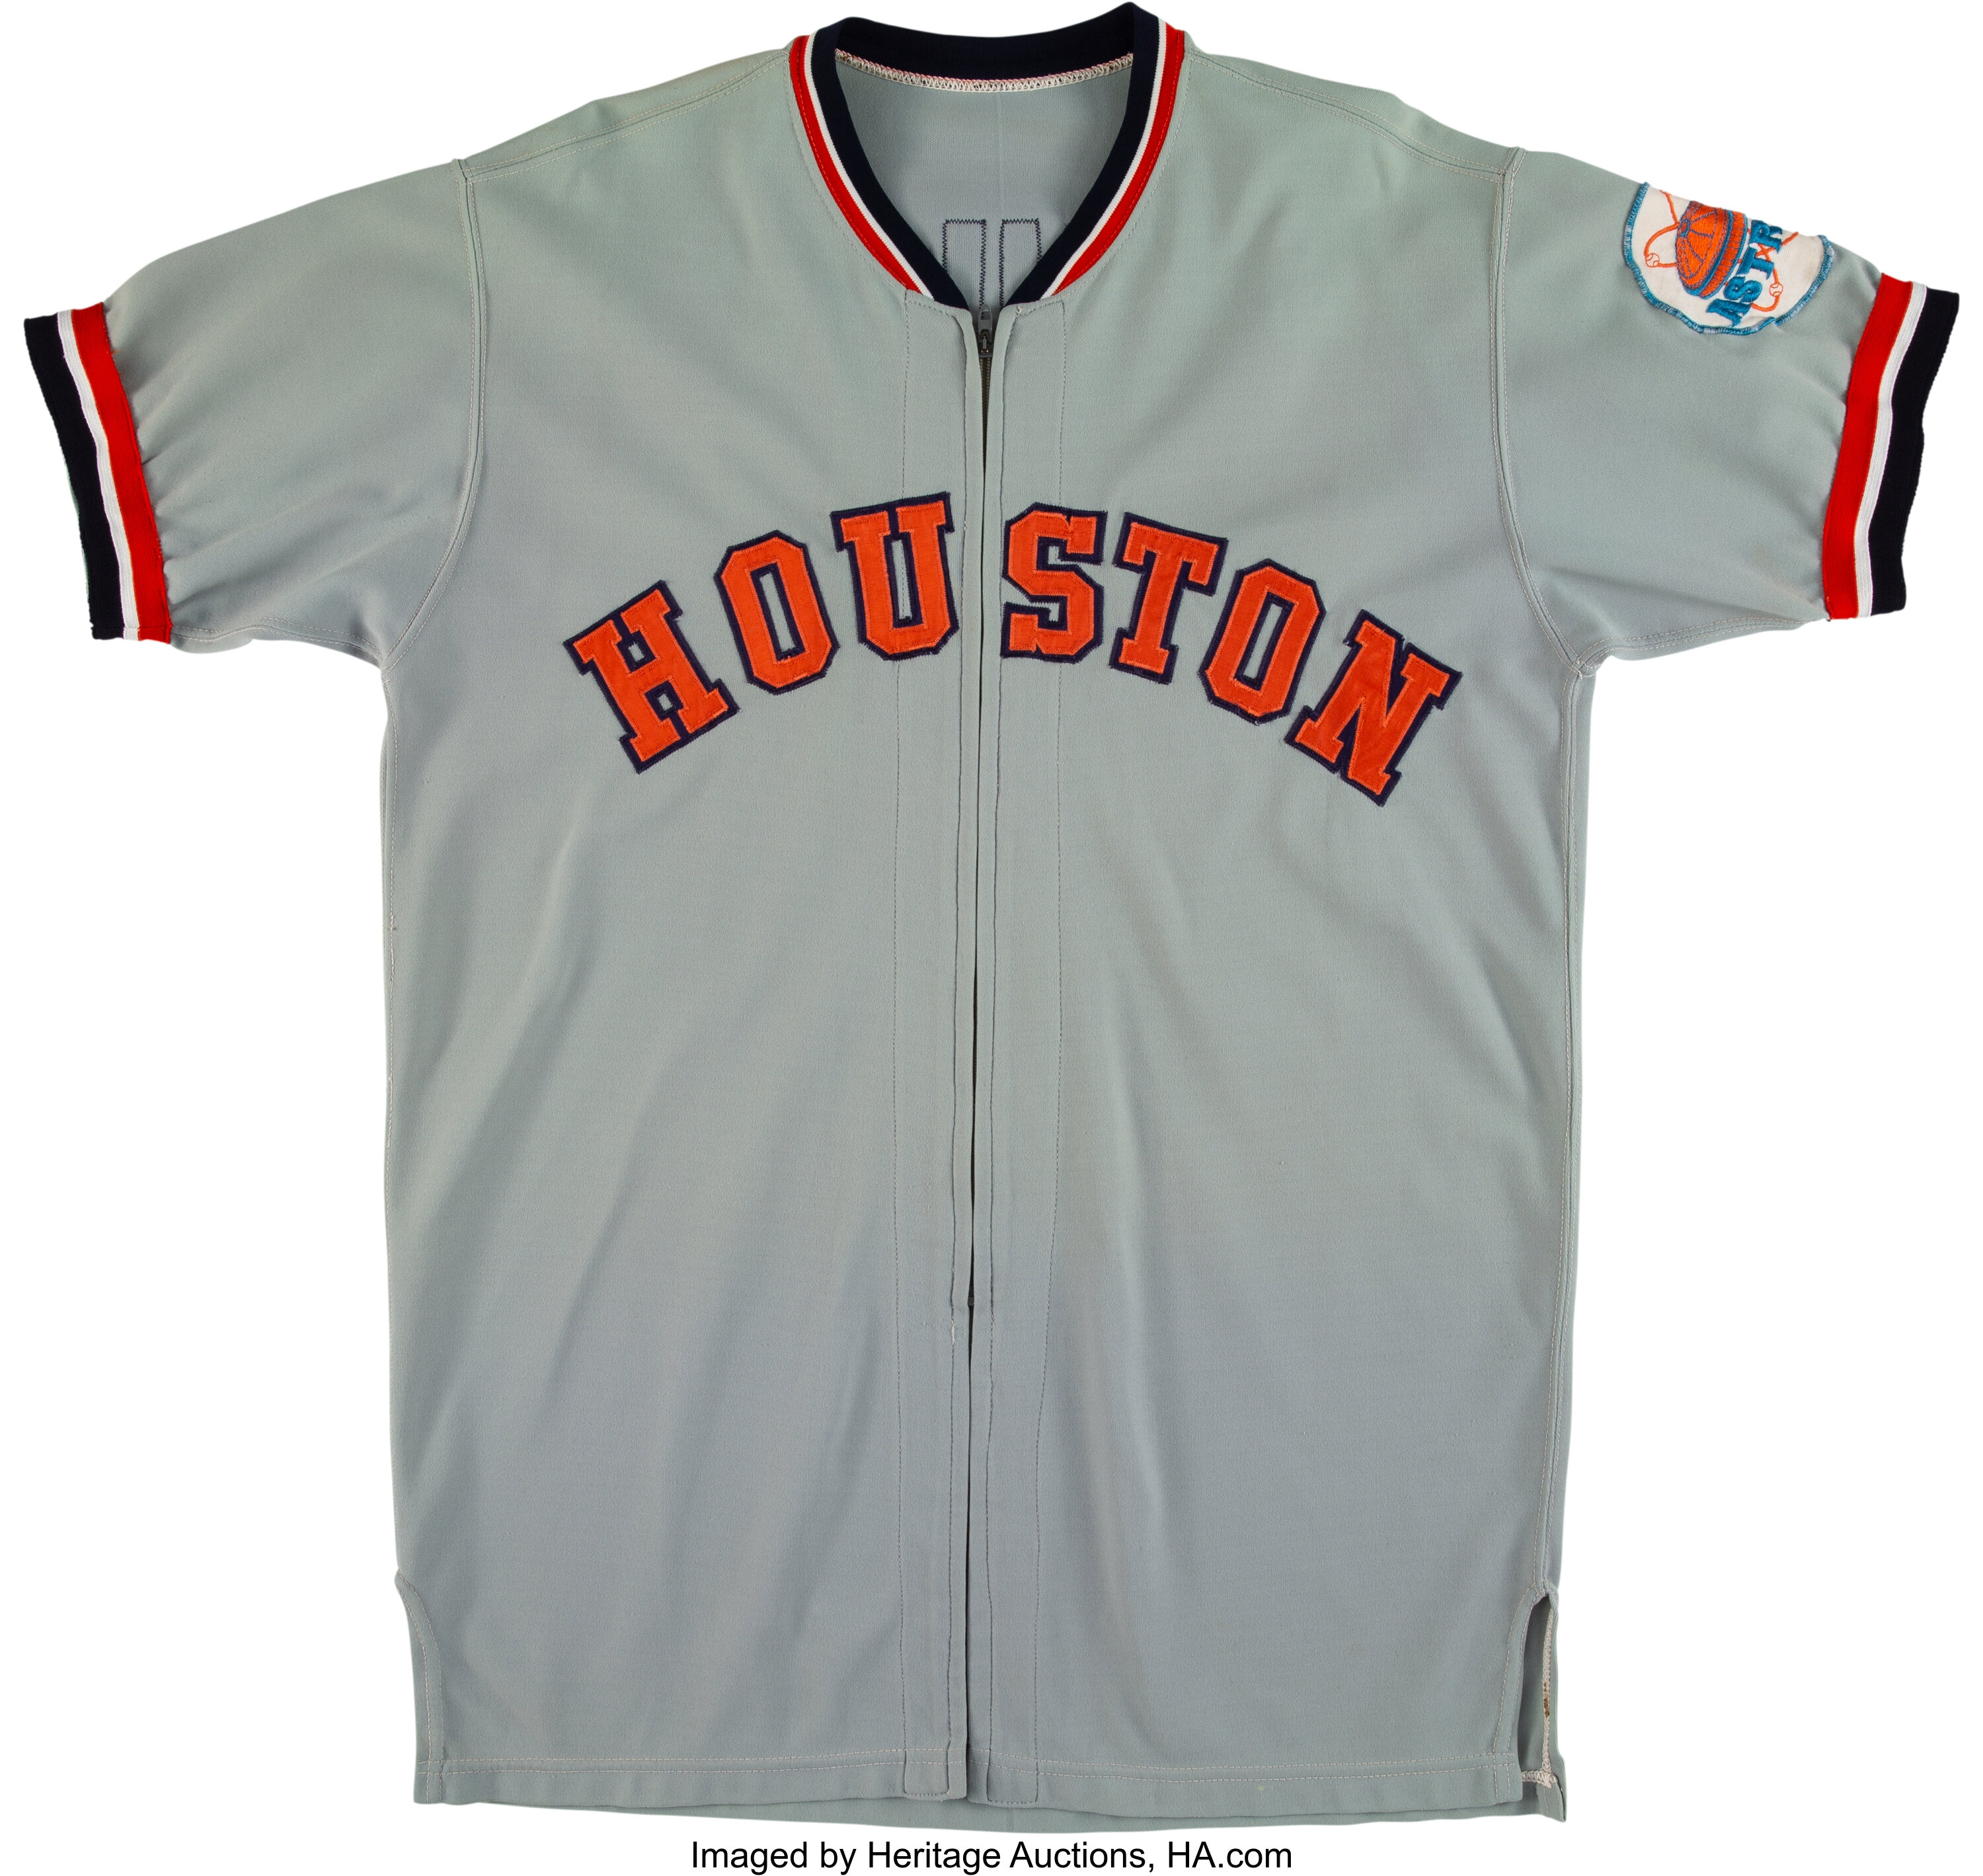 1972 white sox road jersey